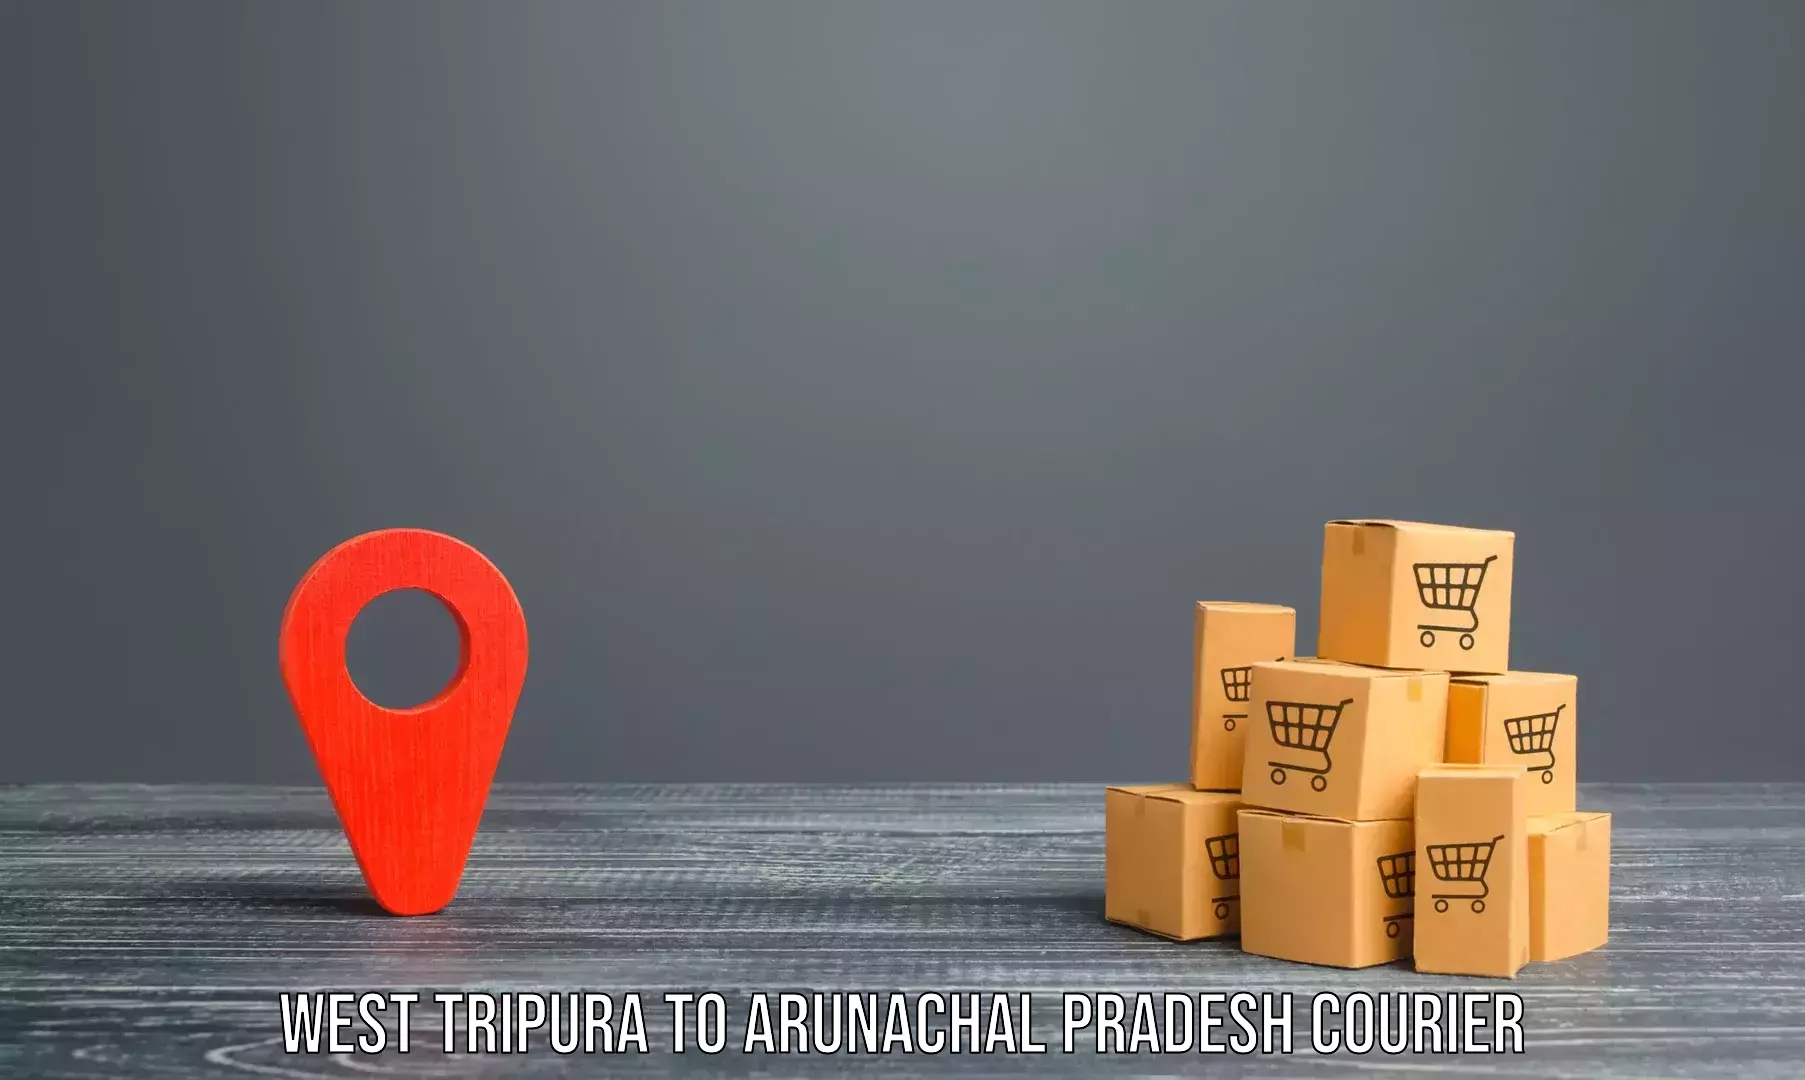 Professional relocation services West Tripura to Deomali